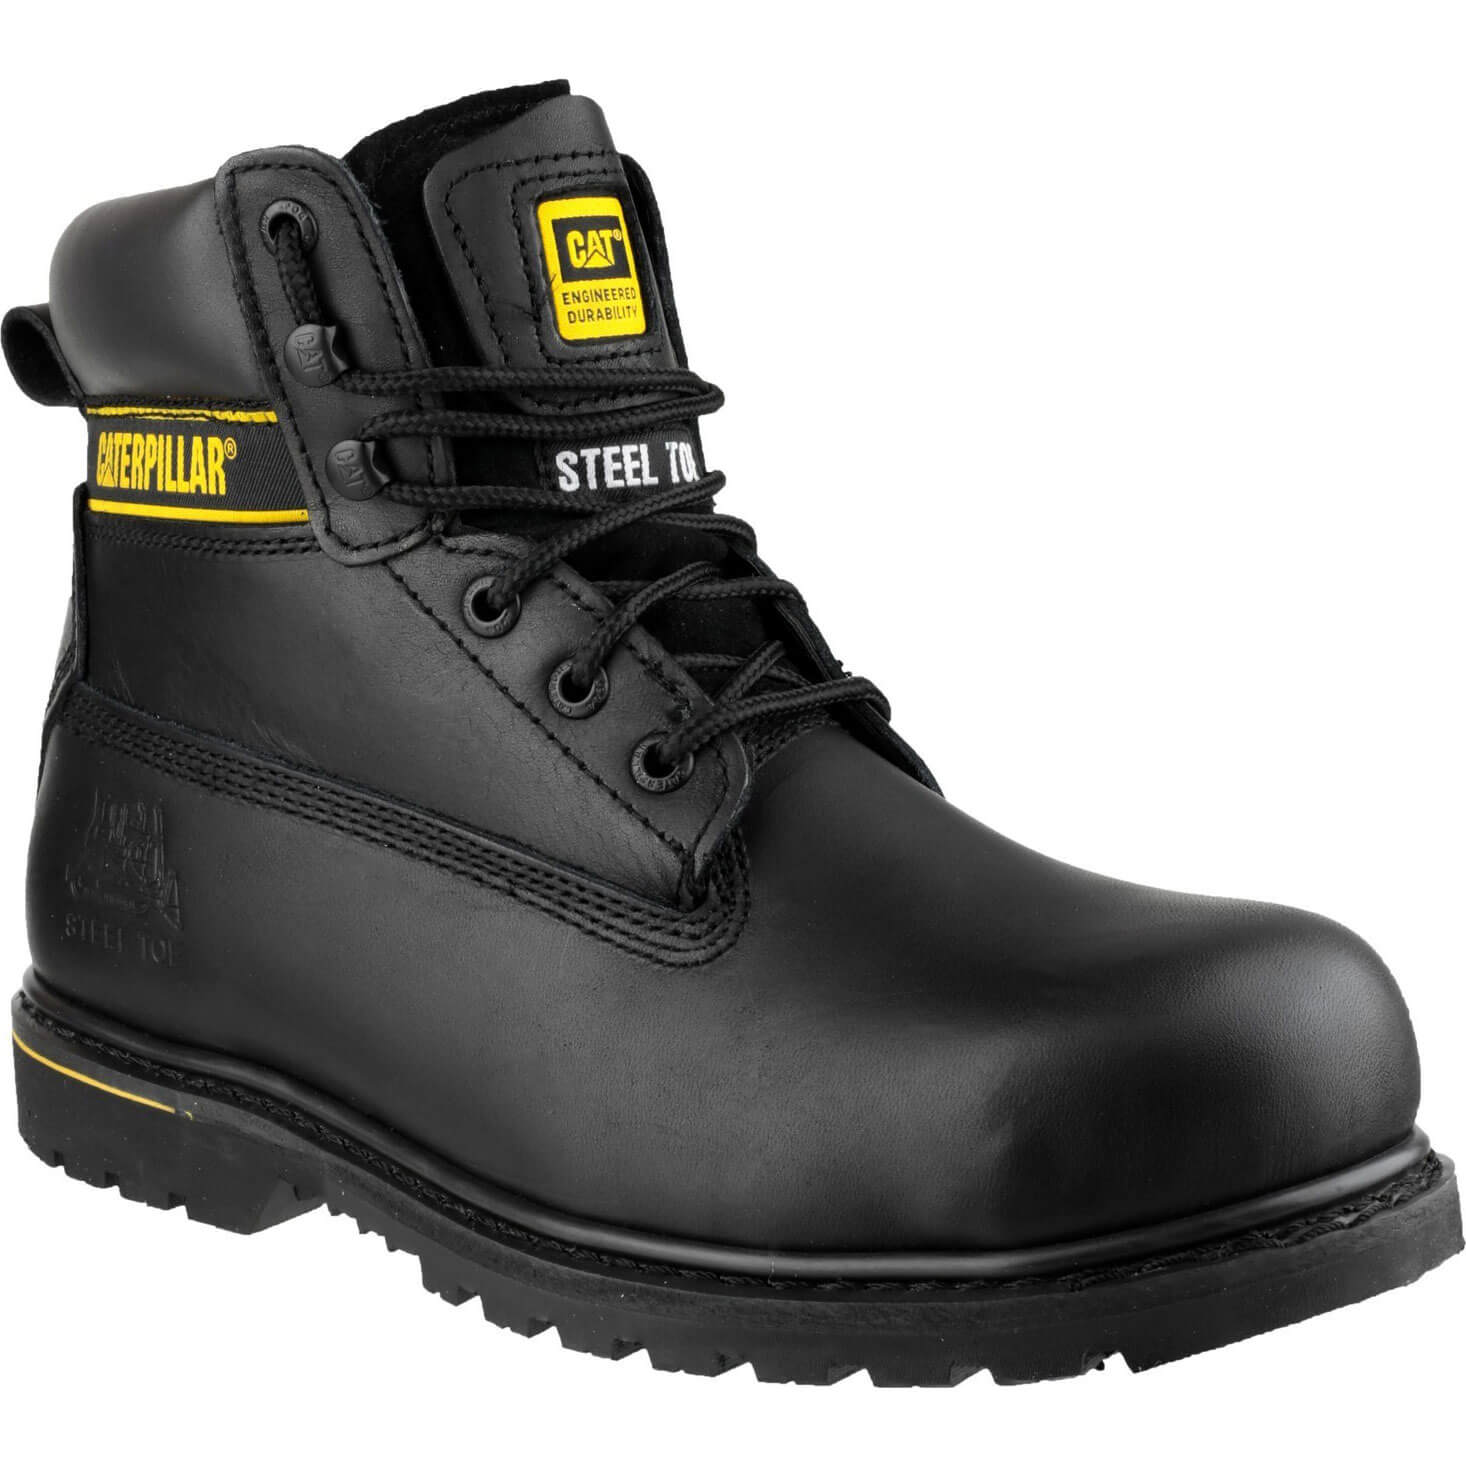 Caterpillar Mens Holton Safety Boots Black Size 9